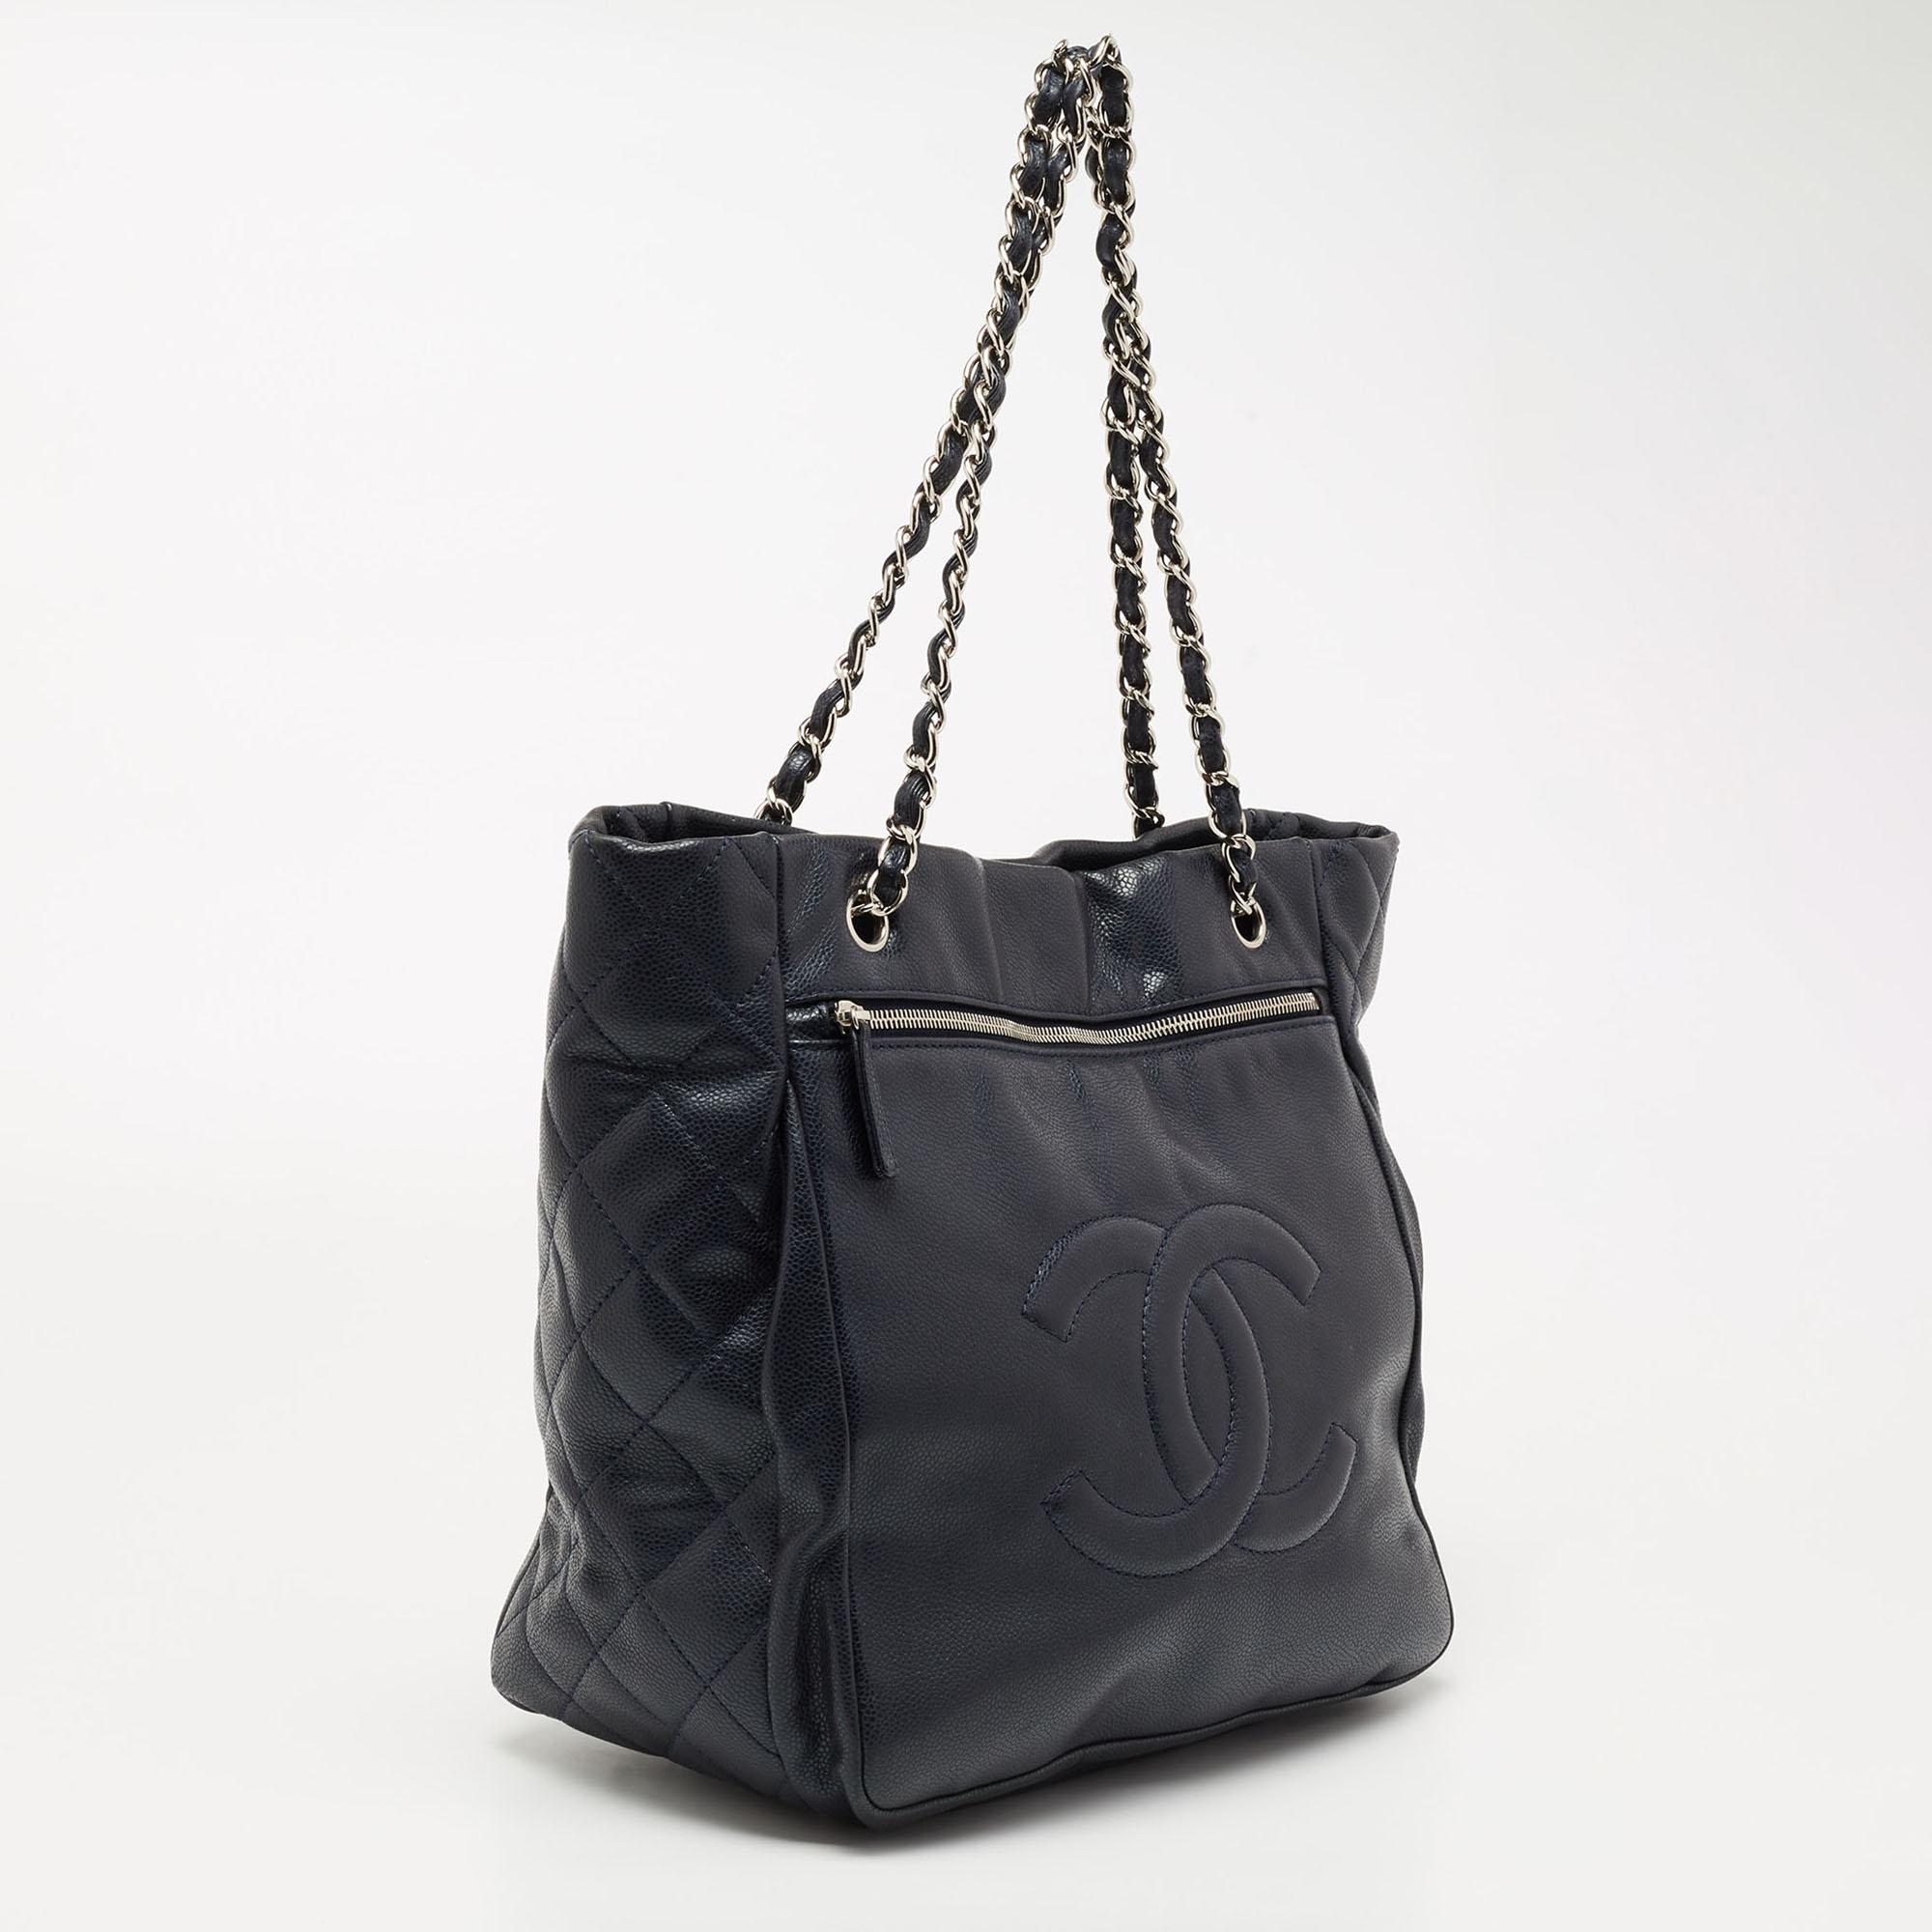 Black Chanel Navy Blue Leather CC Timeless Tote Bag